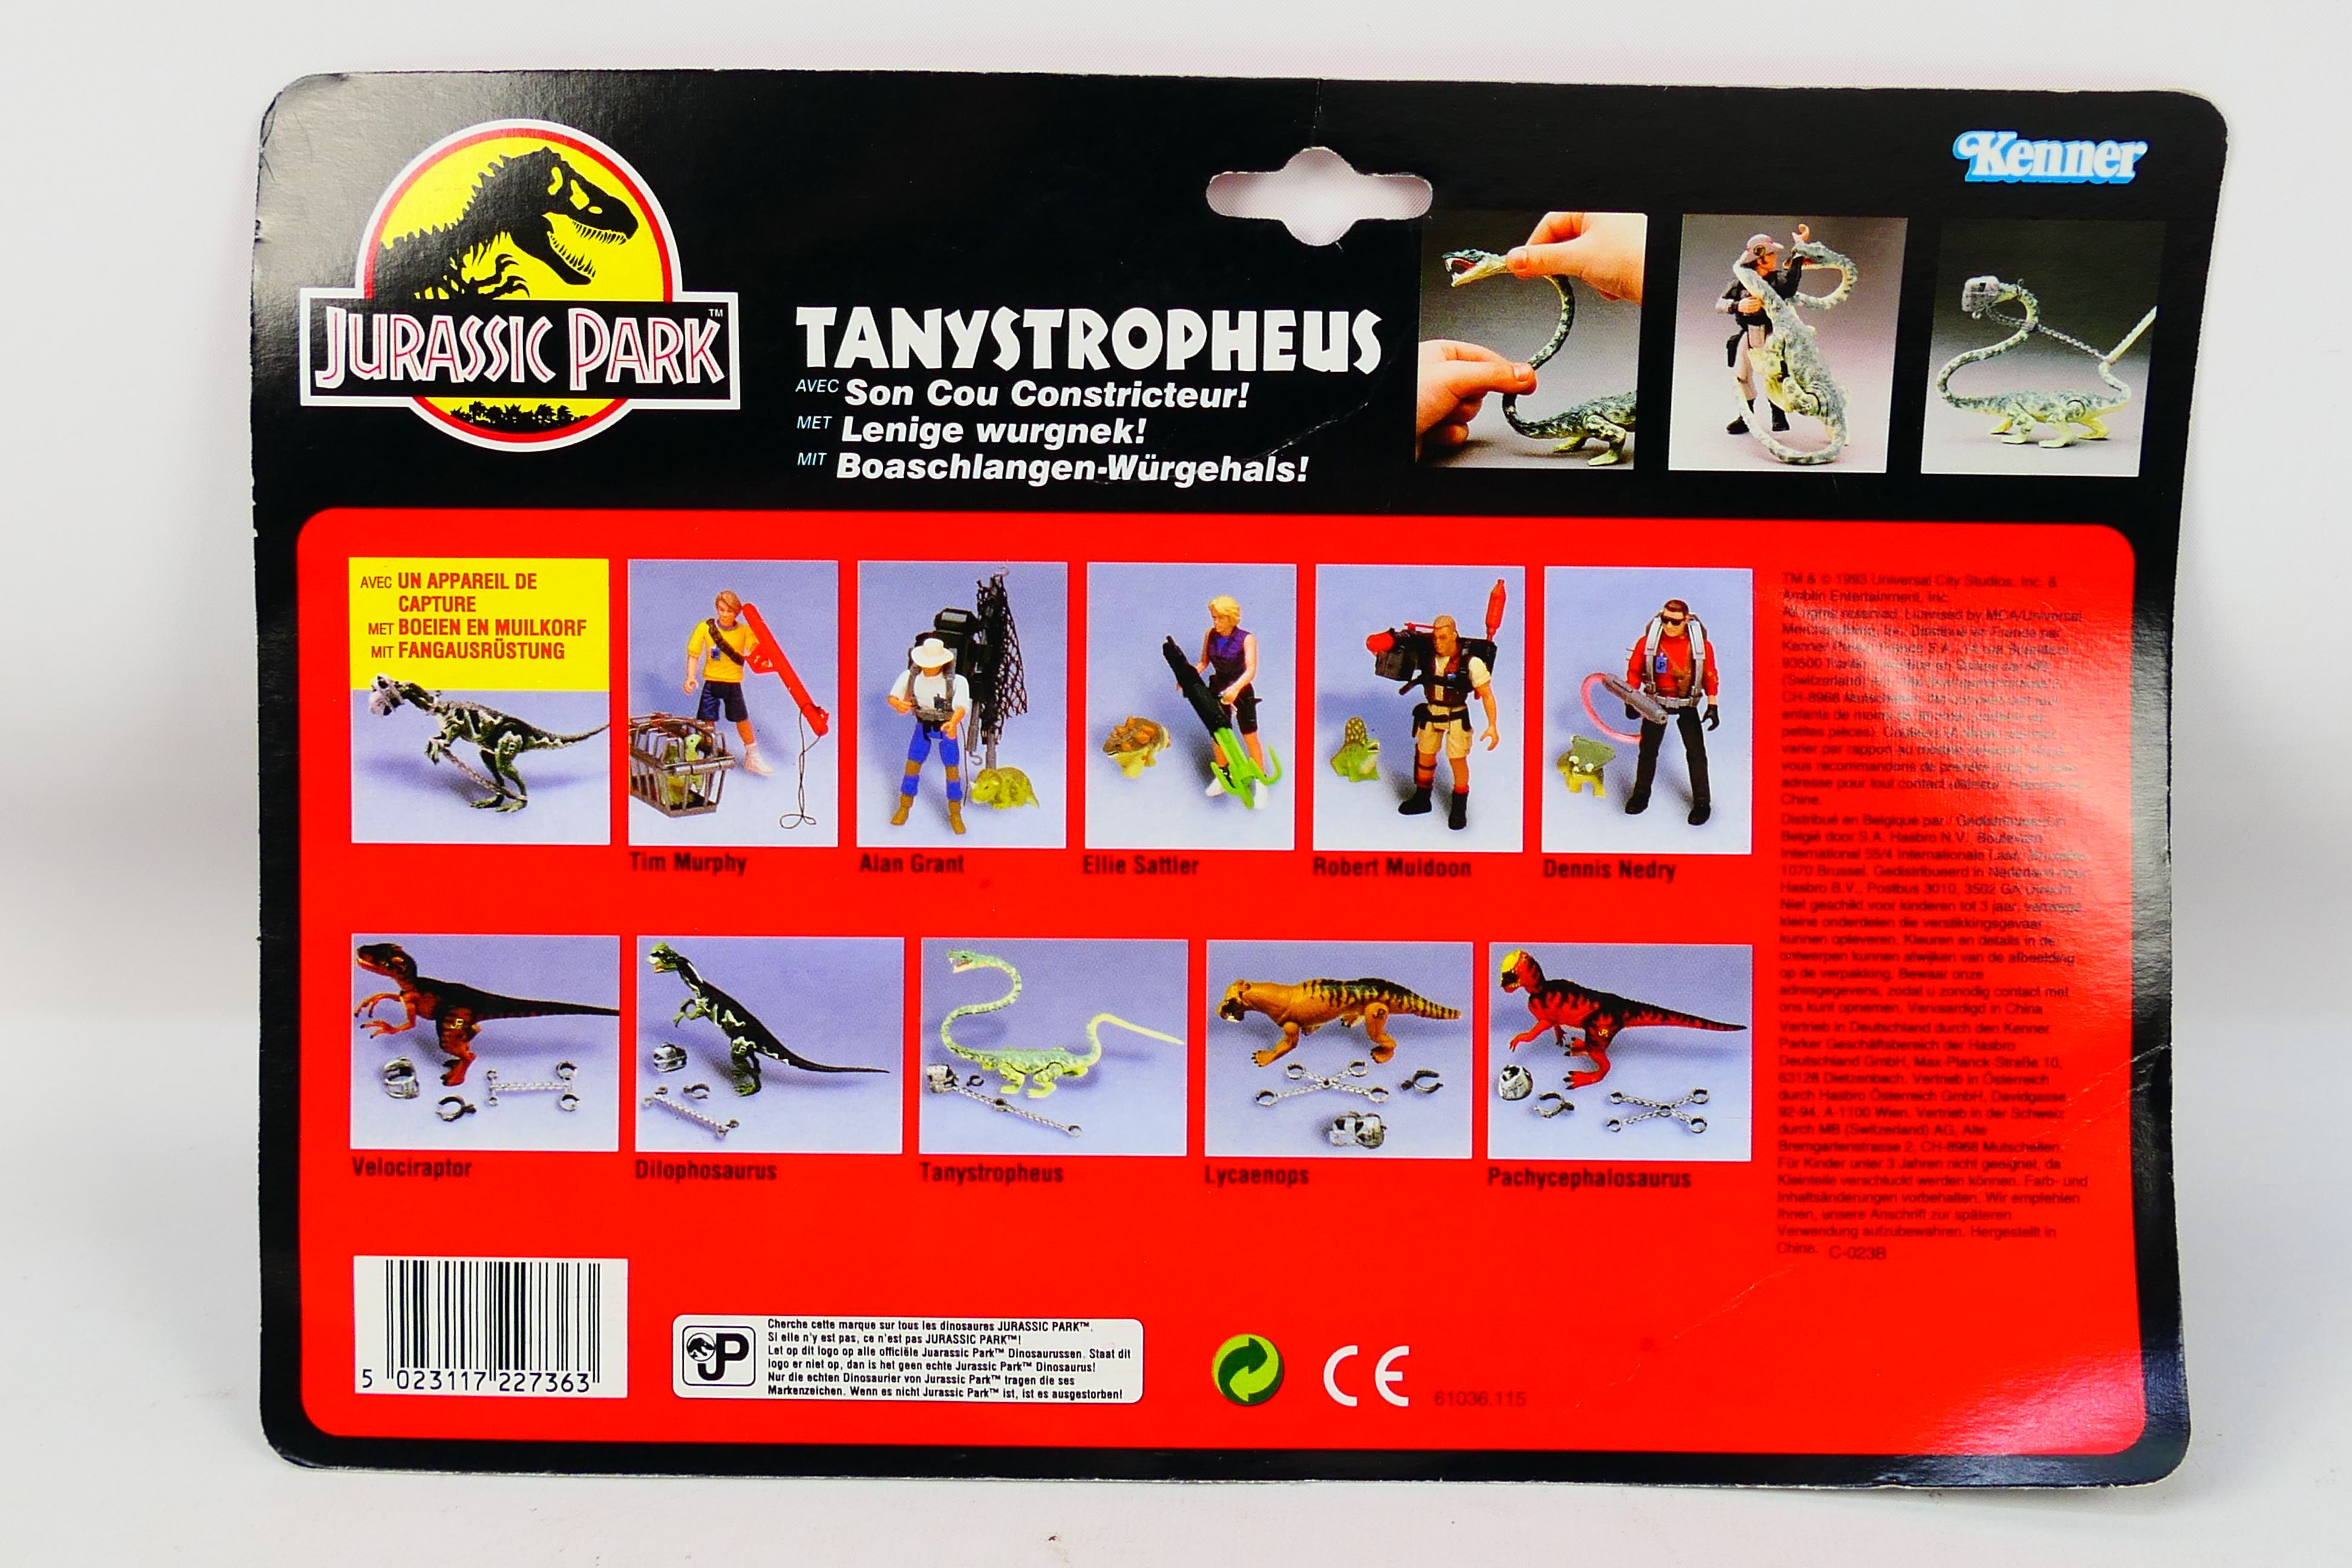 Kenner - Jurassic Park - A 1993 Blister packed figure of Tanytropheus from Jurassic Park. - Image 6 of 6